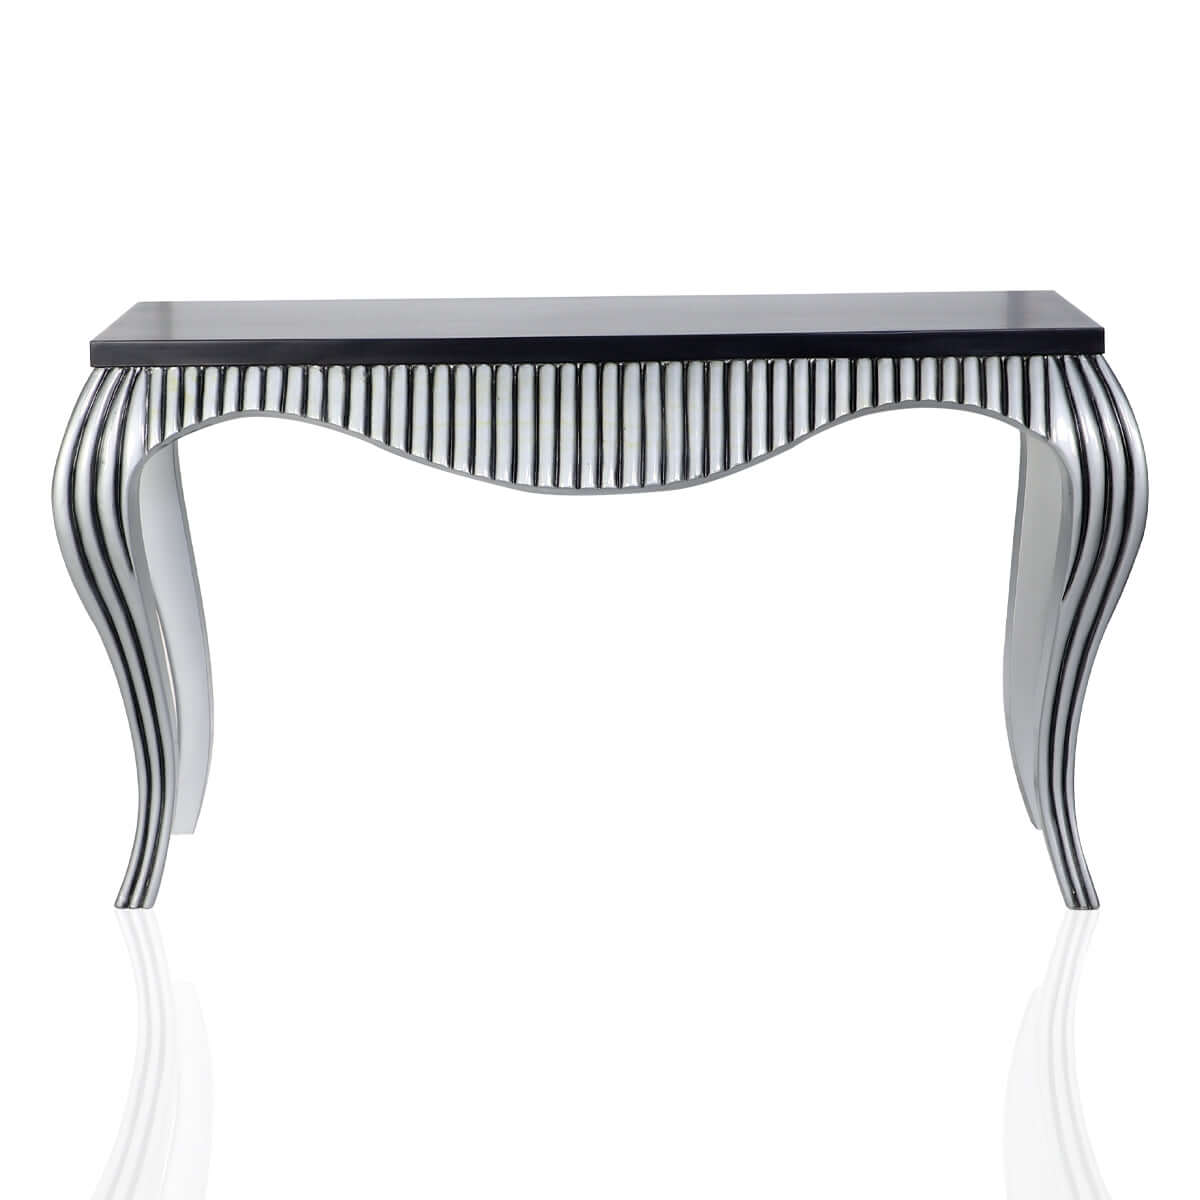 Regat Solid Wood Console Table (Silver Brown)